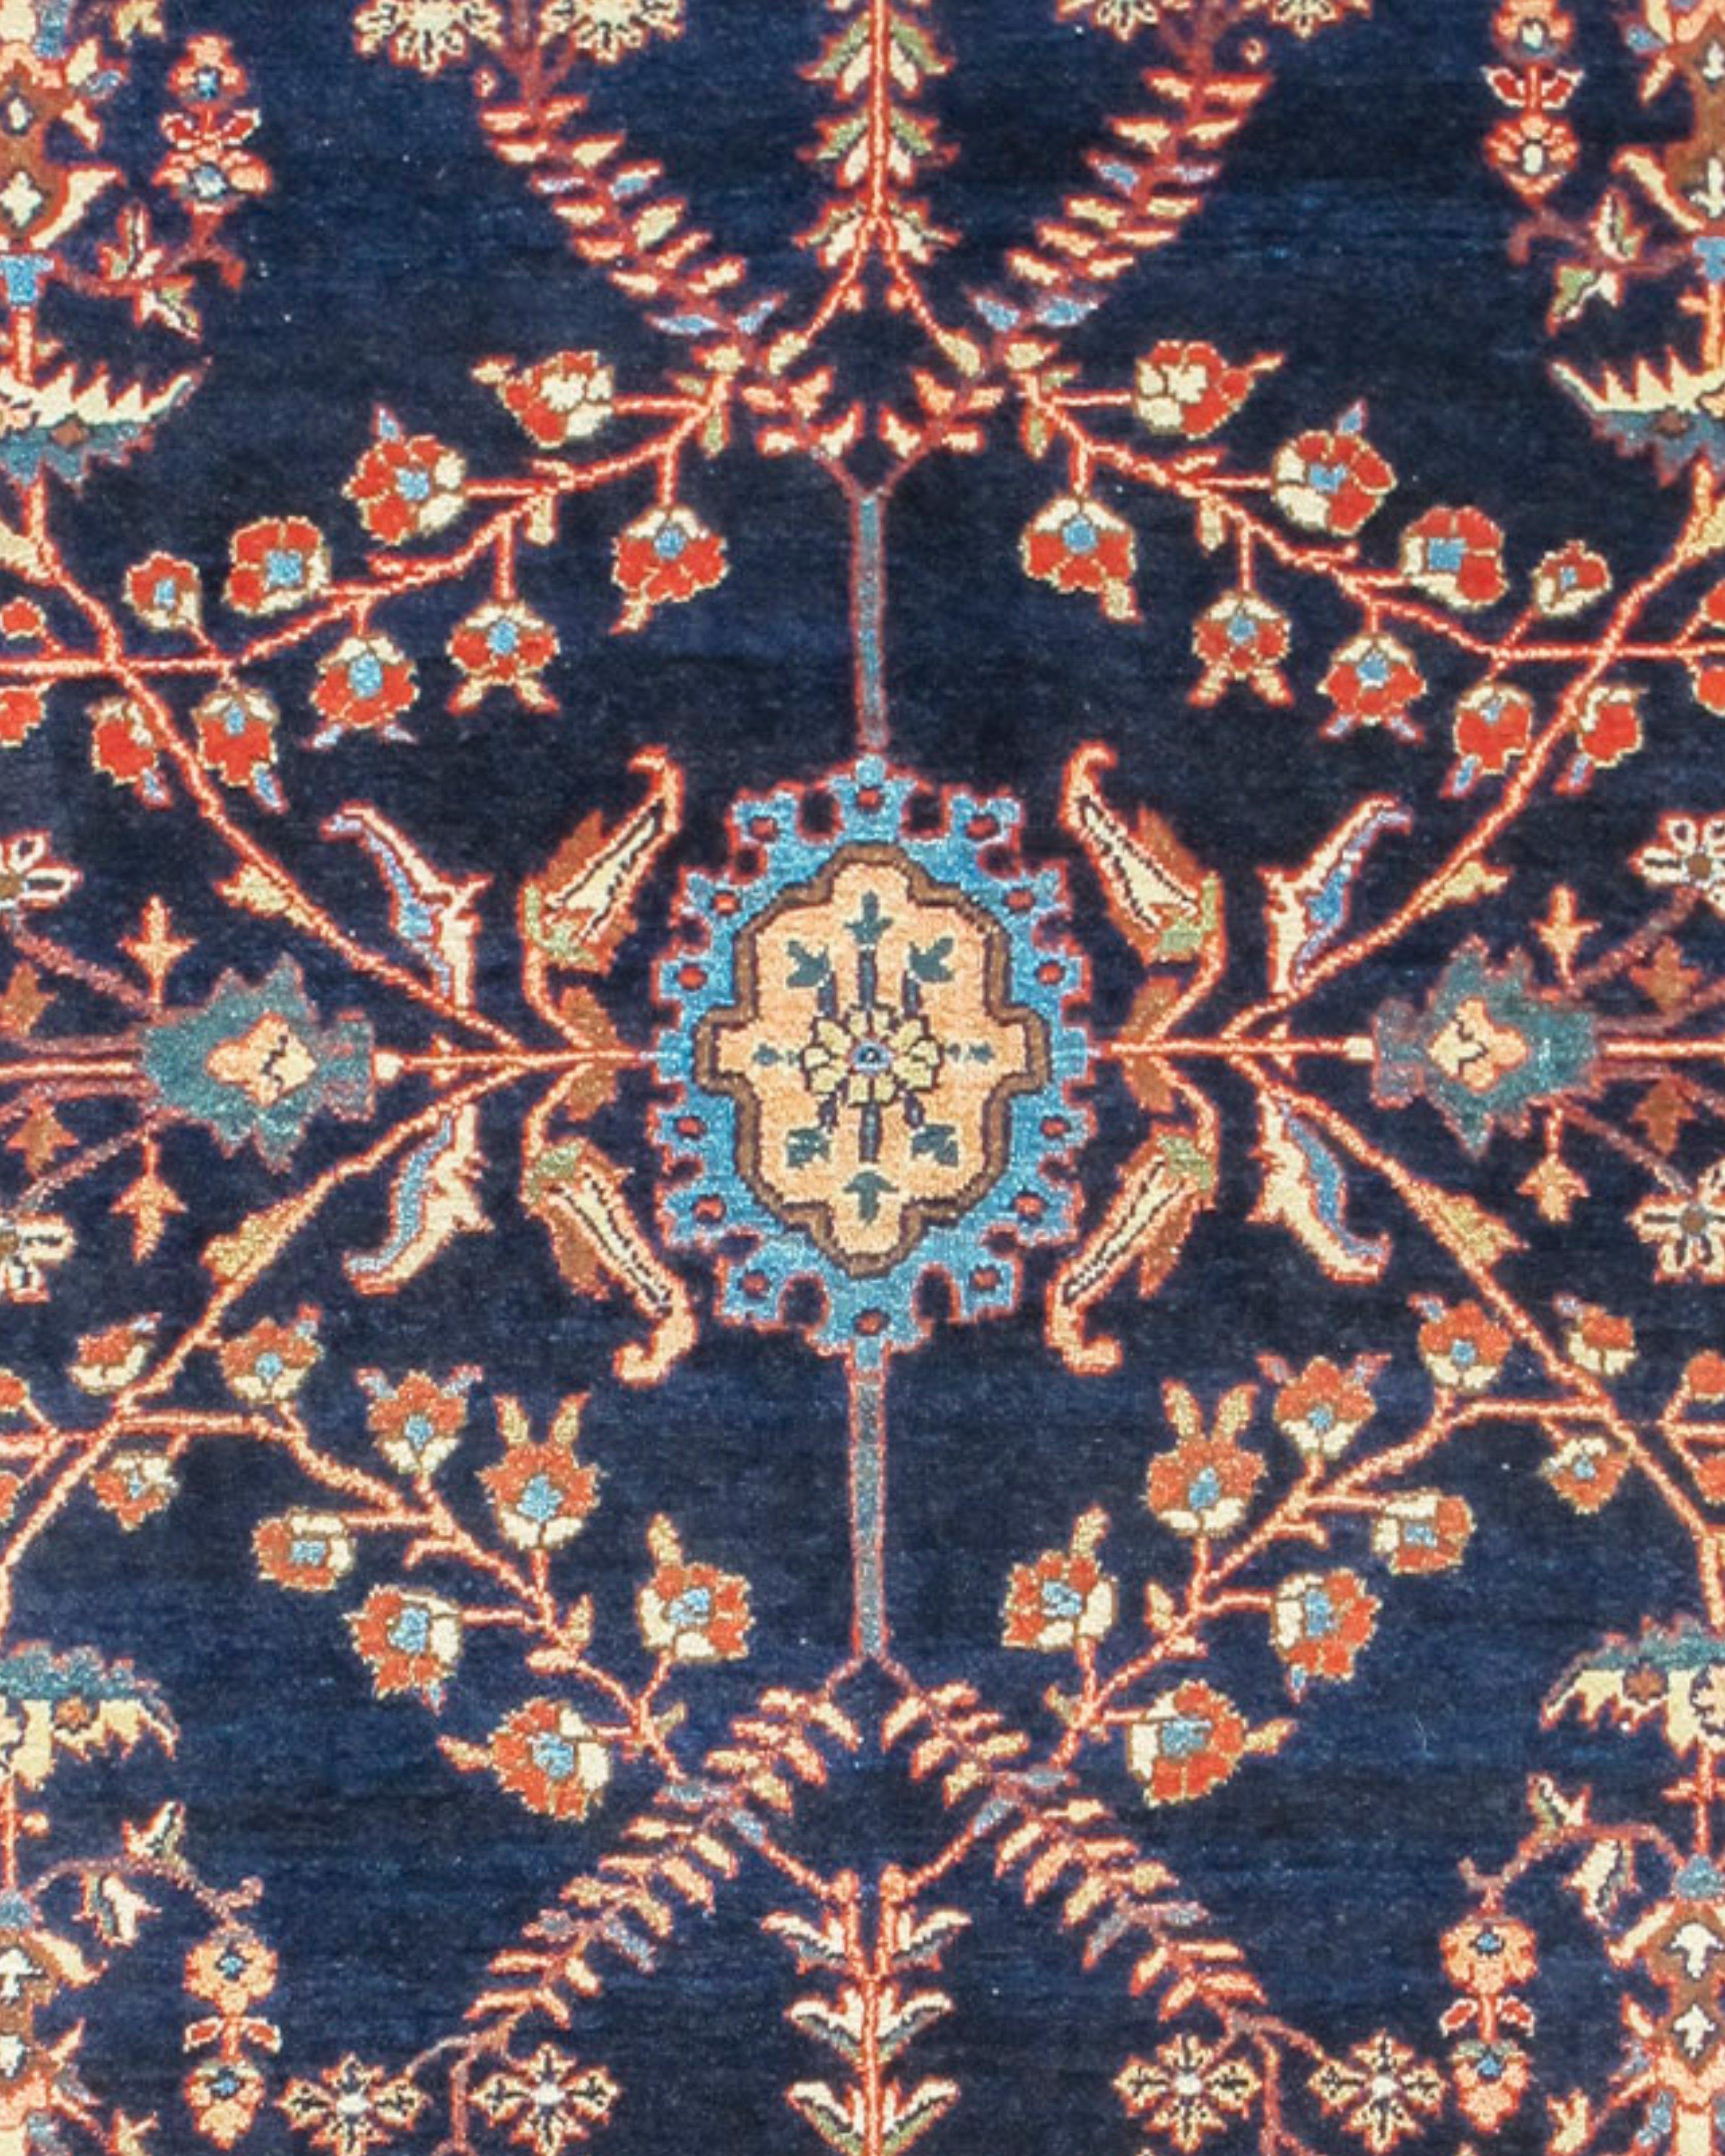 Sarouk Rug, Early 20th Century

This refined antique Sarouk carpet from central Persia elegantly draws a variety of realistic and stylized garlands and flowering plants in a meandering network balanced around a small jewel-like medallion. Ornament